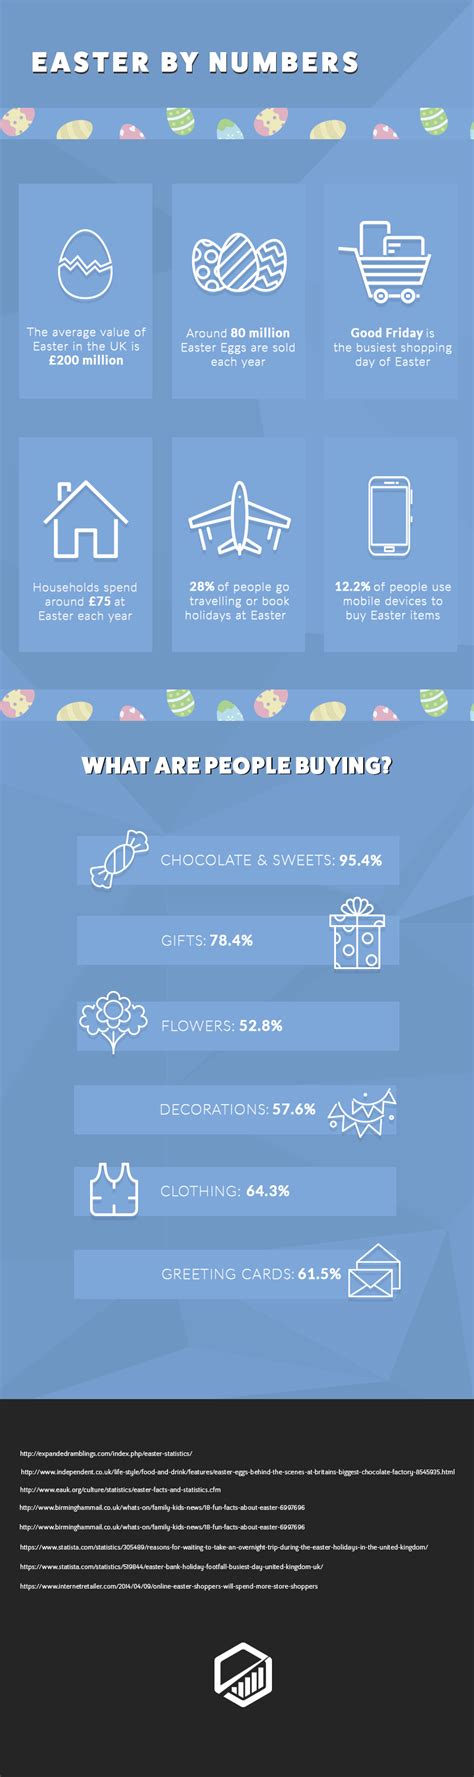 A Look At Easter By The Numbers Infographic